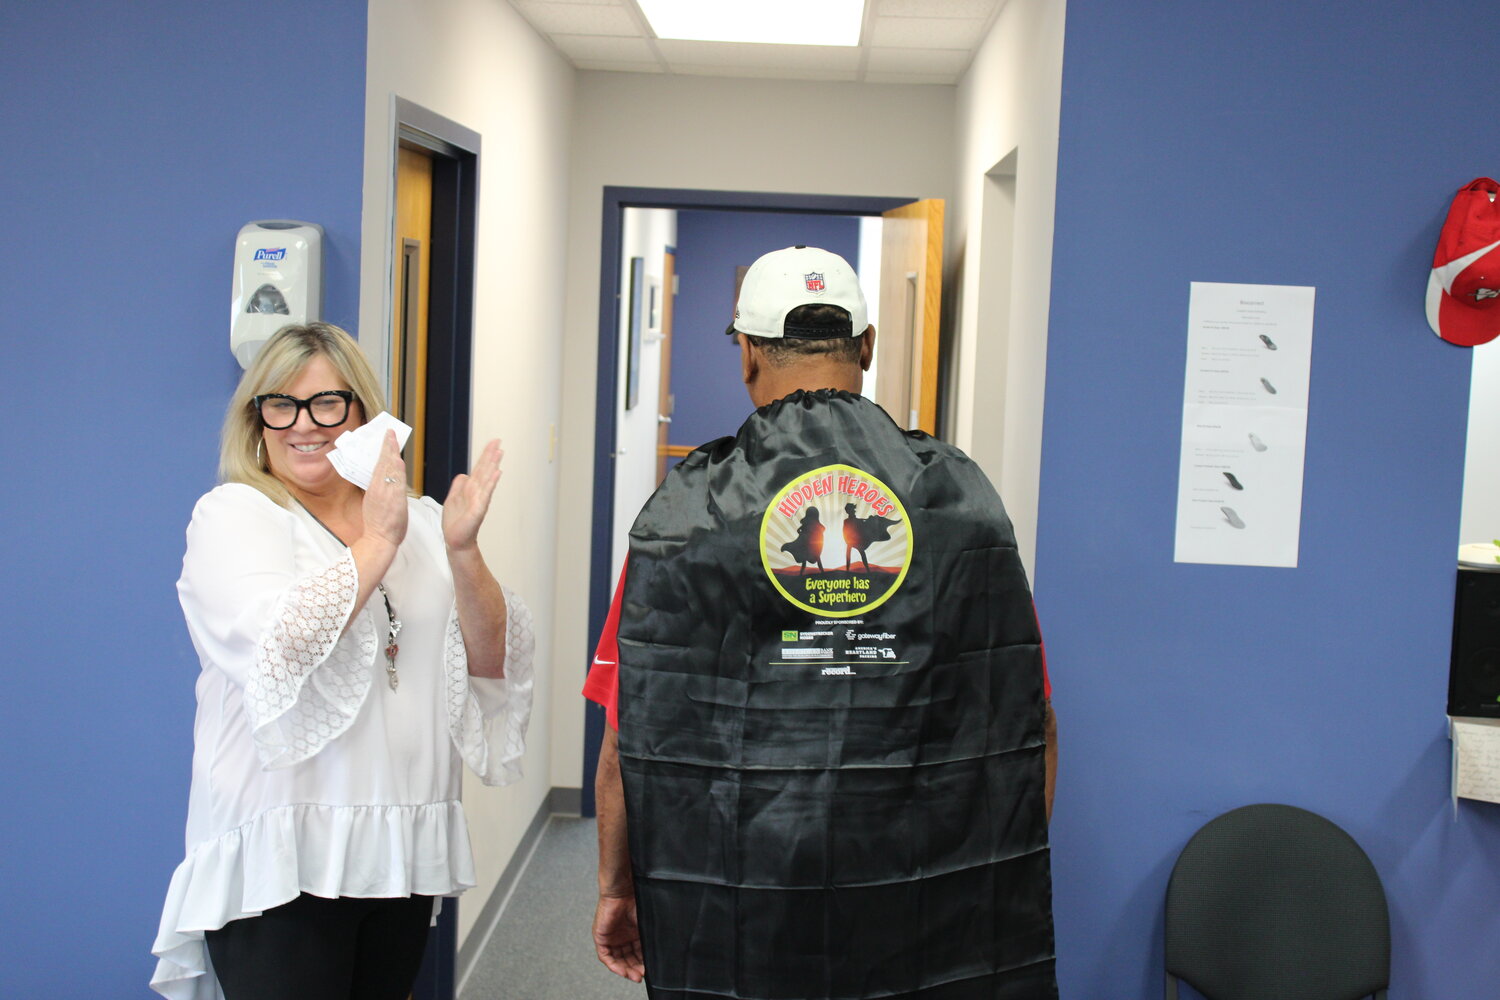 Alfred Wheeler, better known as The Candyman, shows off his Hidden Hero superhero cape after it was presented to him by the Warren County Record’s Sales Manager Kelley Wright.